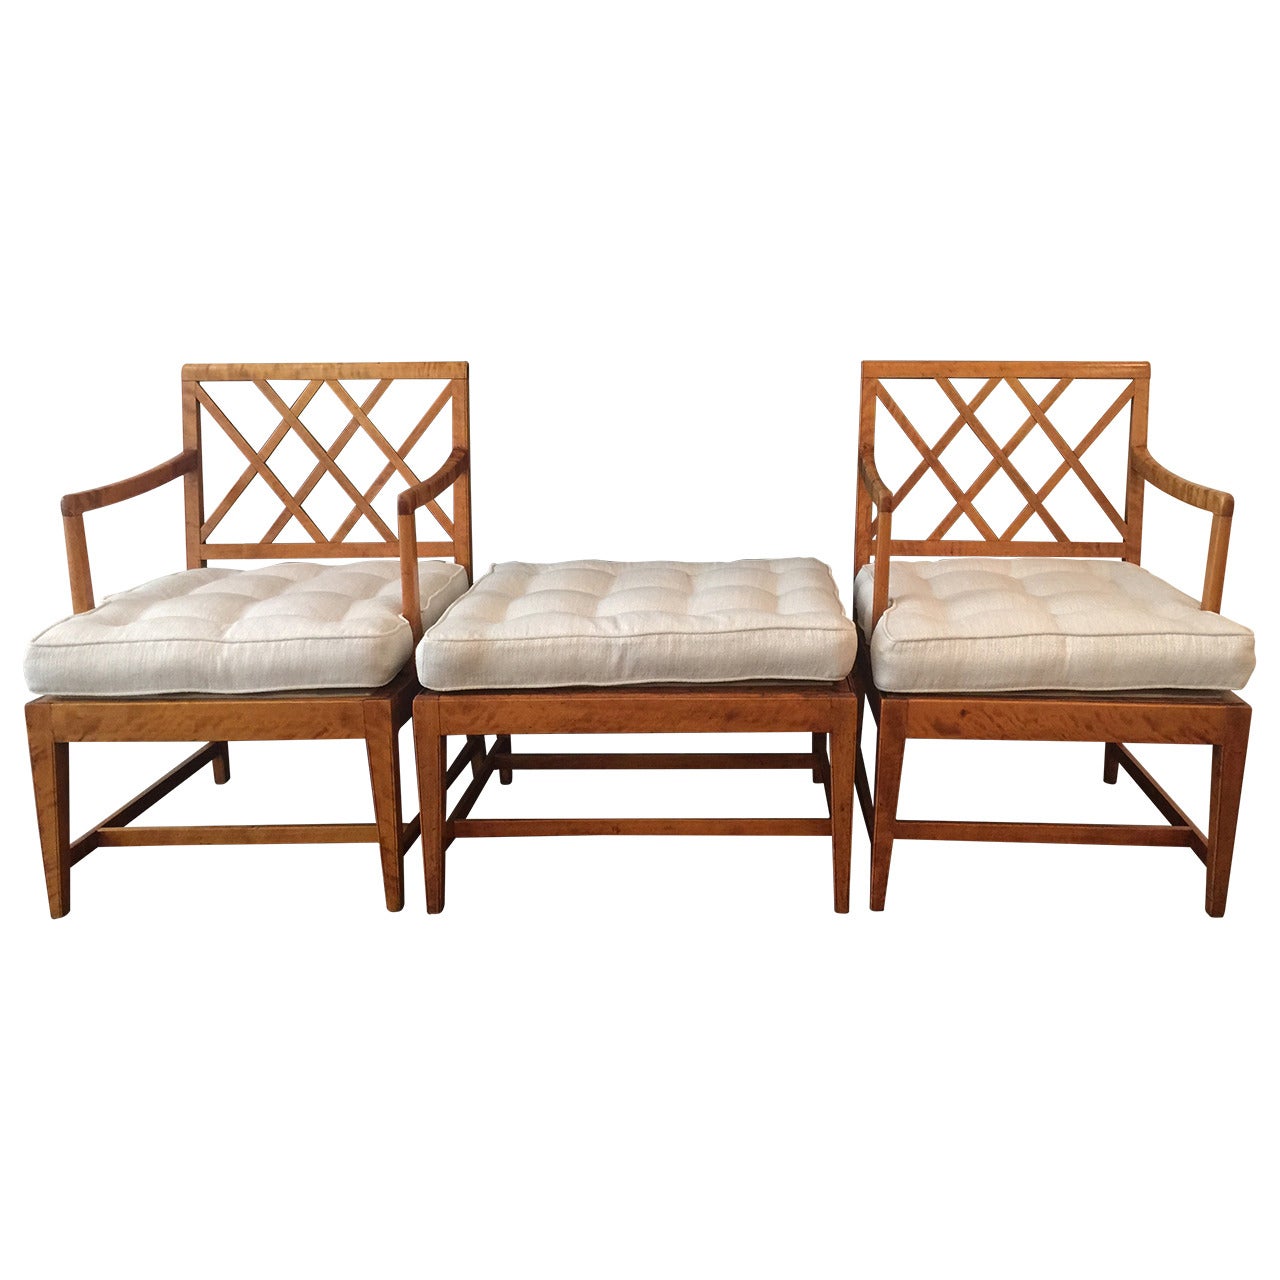 Pair of Armchairs and Ottoman by Carl Malmsten, Sweden circa 1920